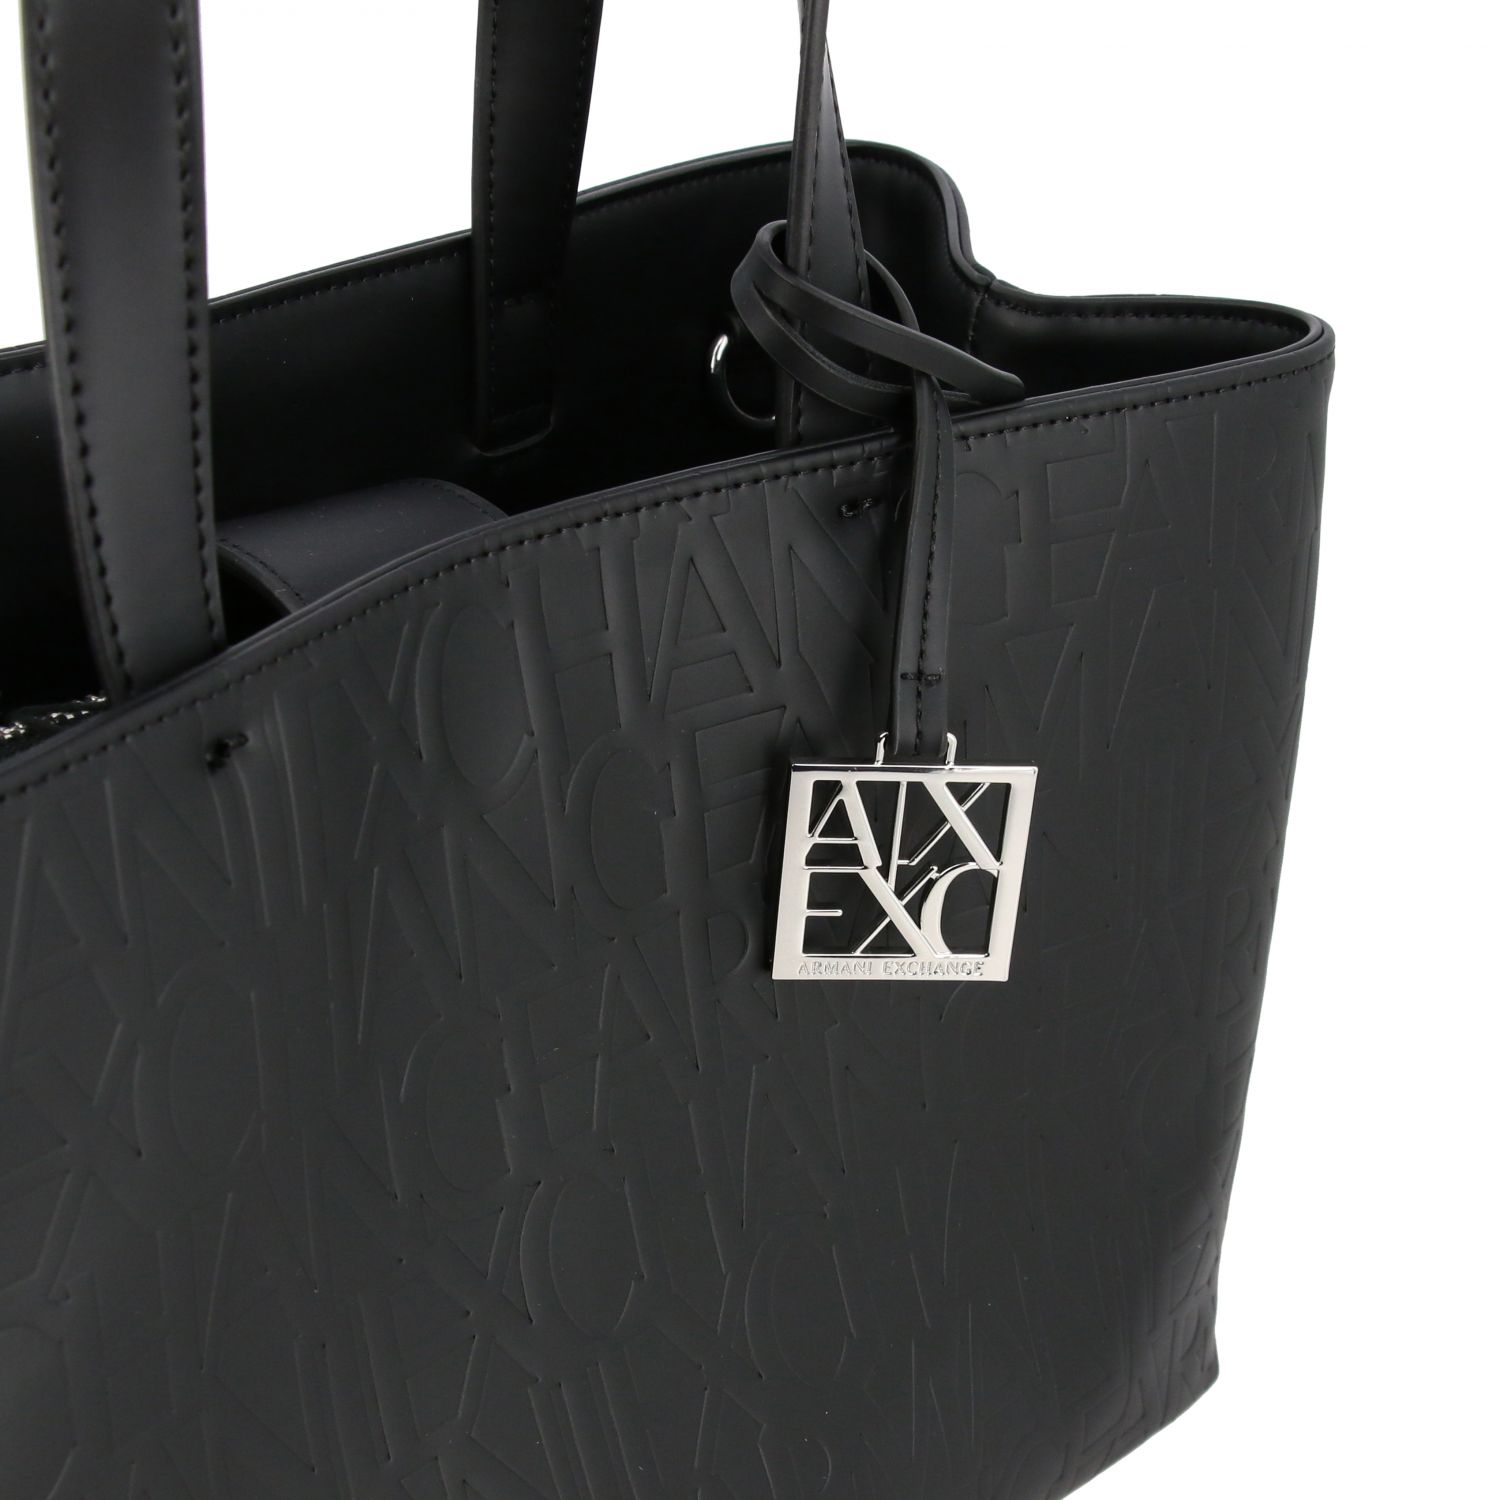 Armani Exchange bag in synthetic leather with all over embossed logo